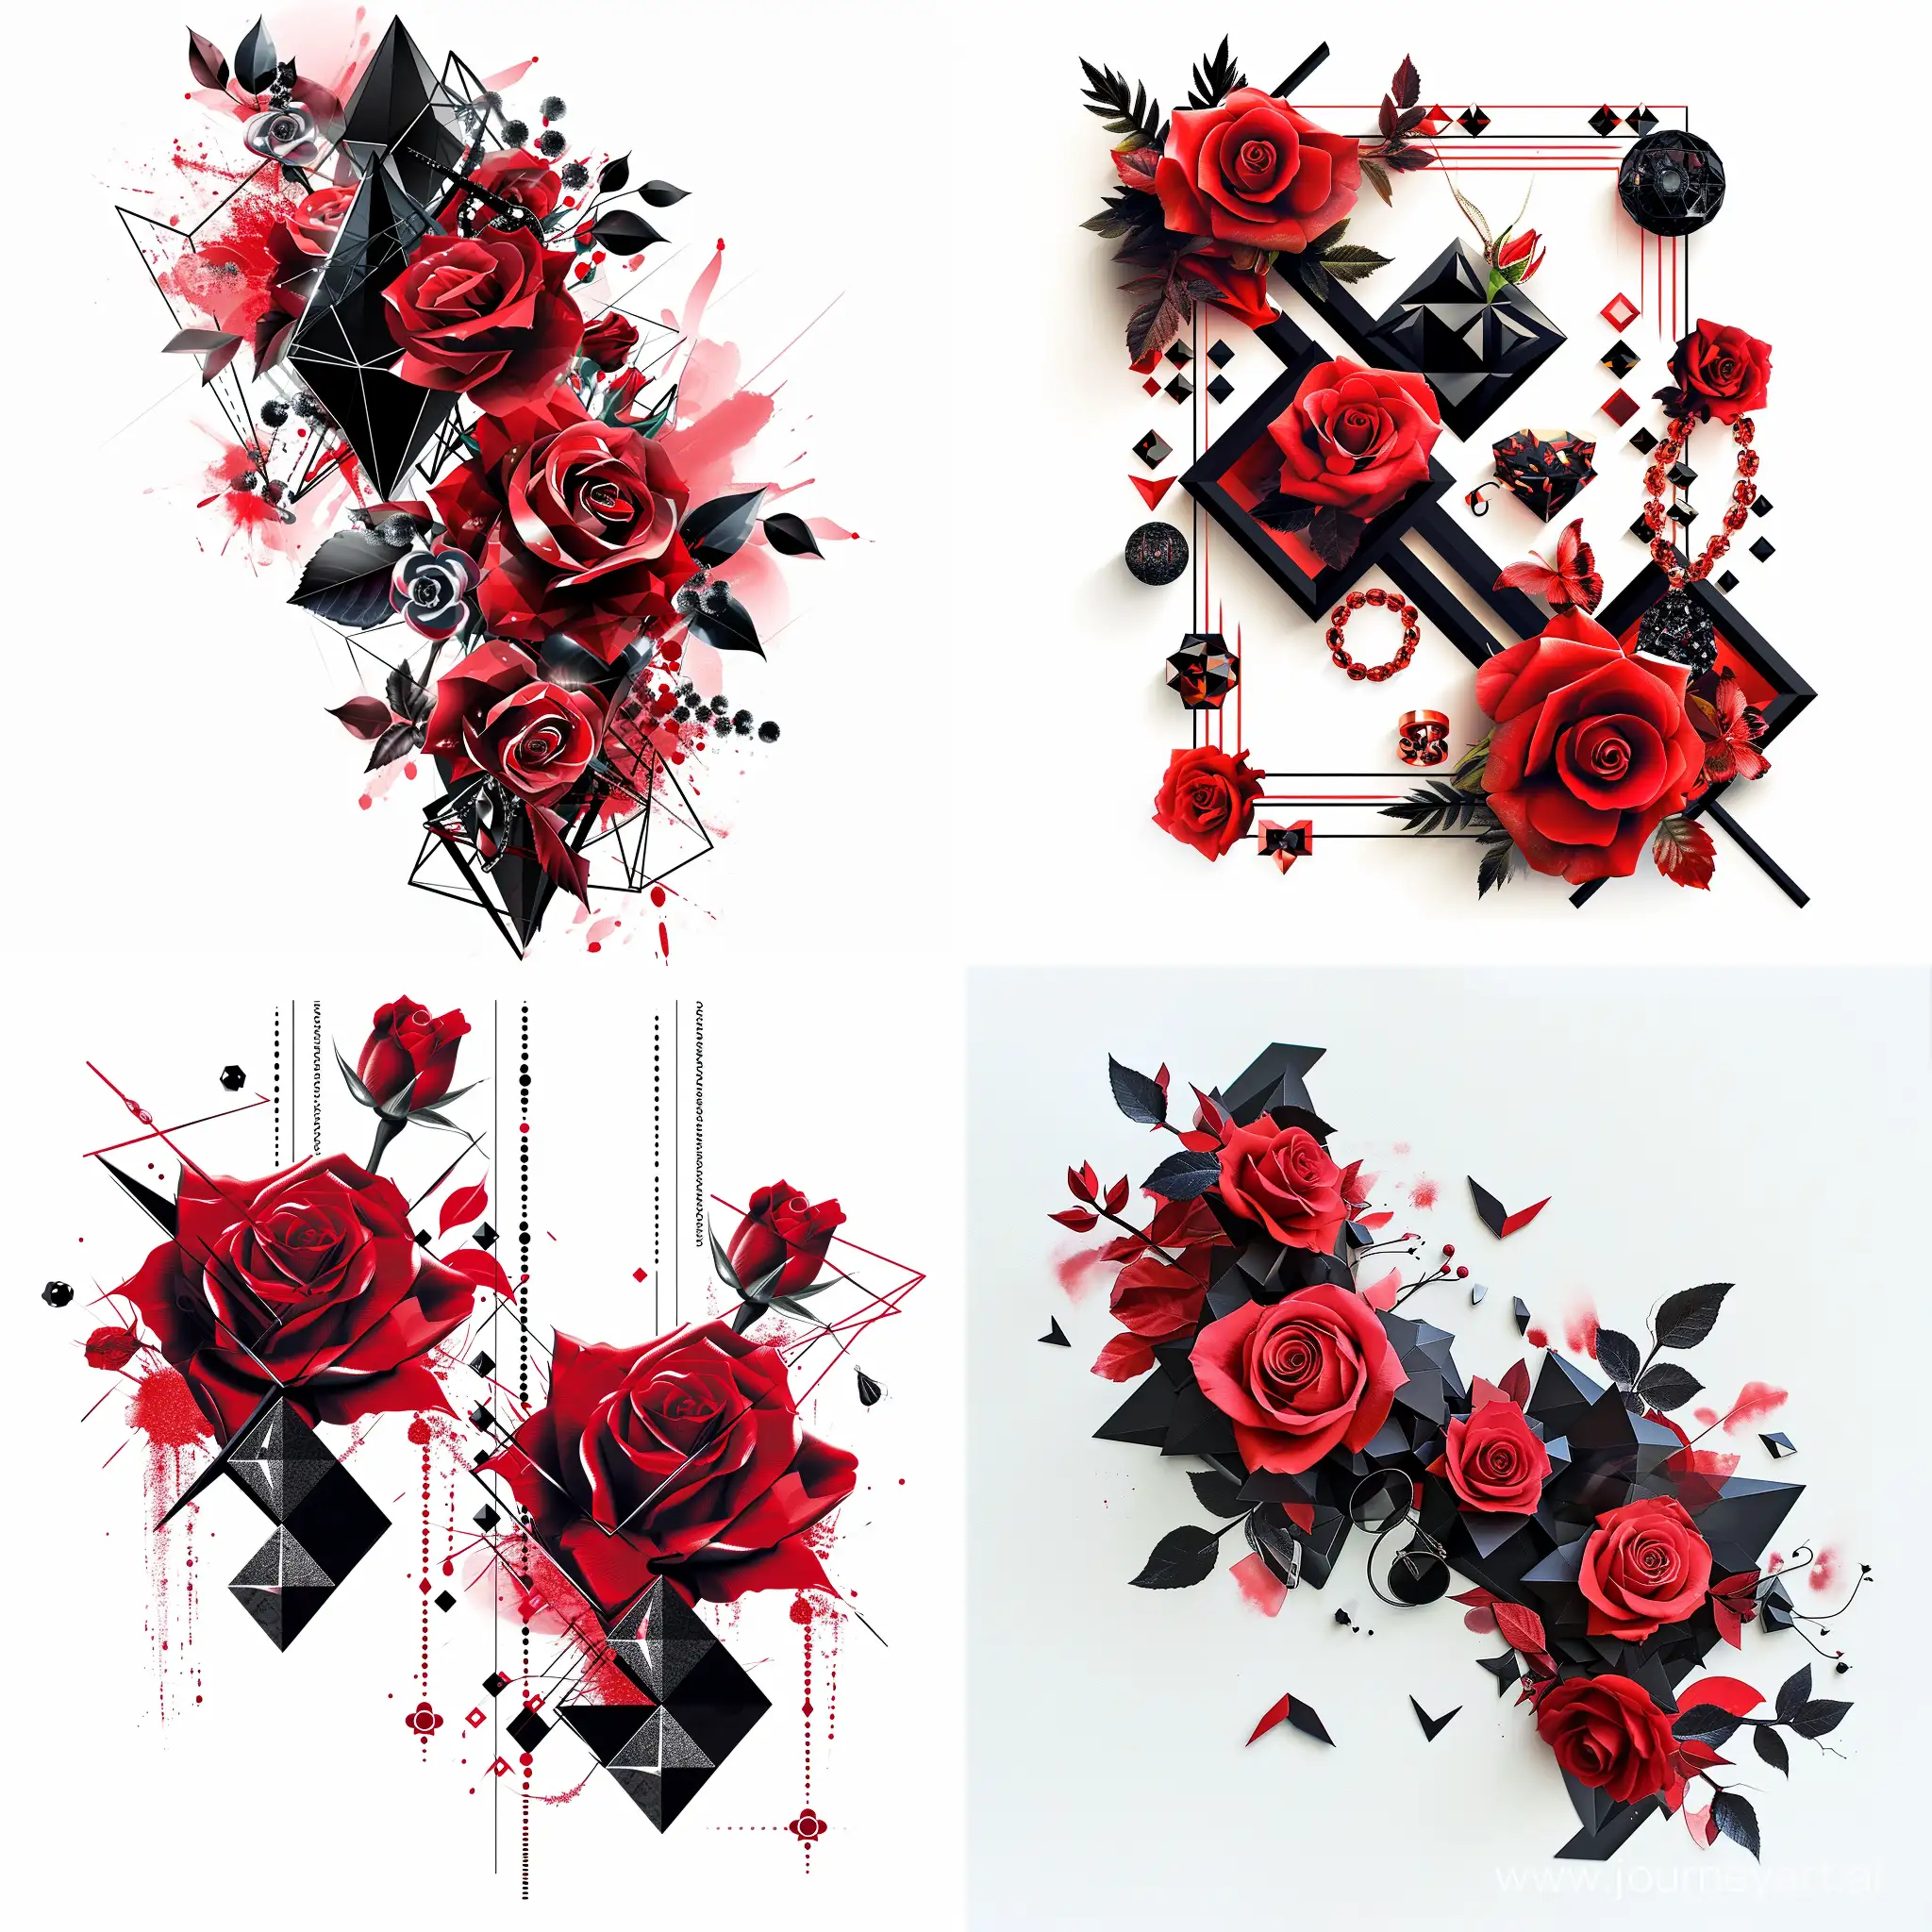 Stylish-Geometric-Ornament-of-Red-and-Black-Fashion-Accessories-on-White-Background